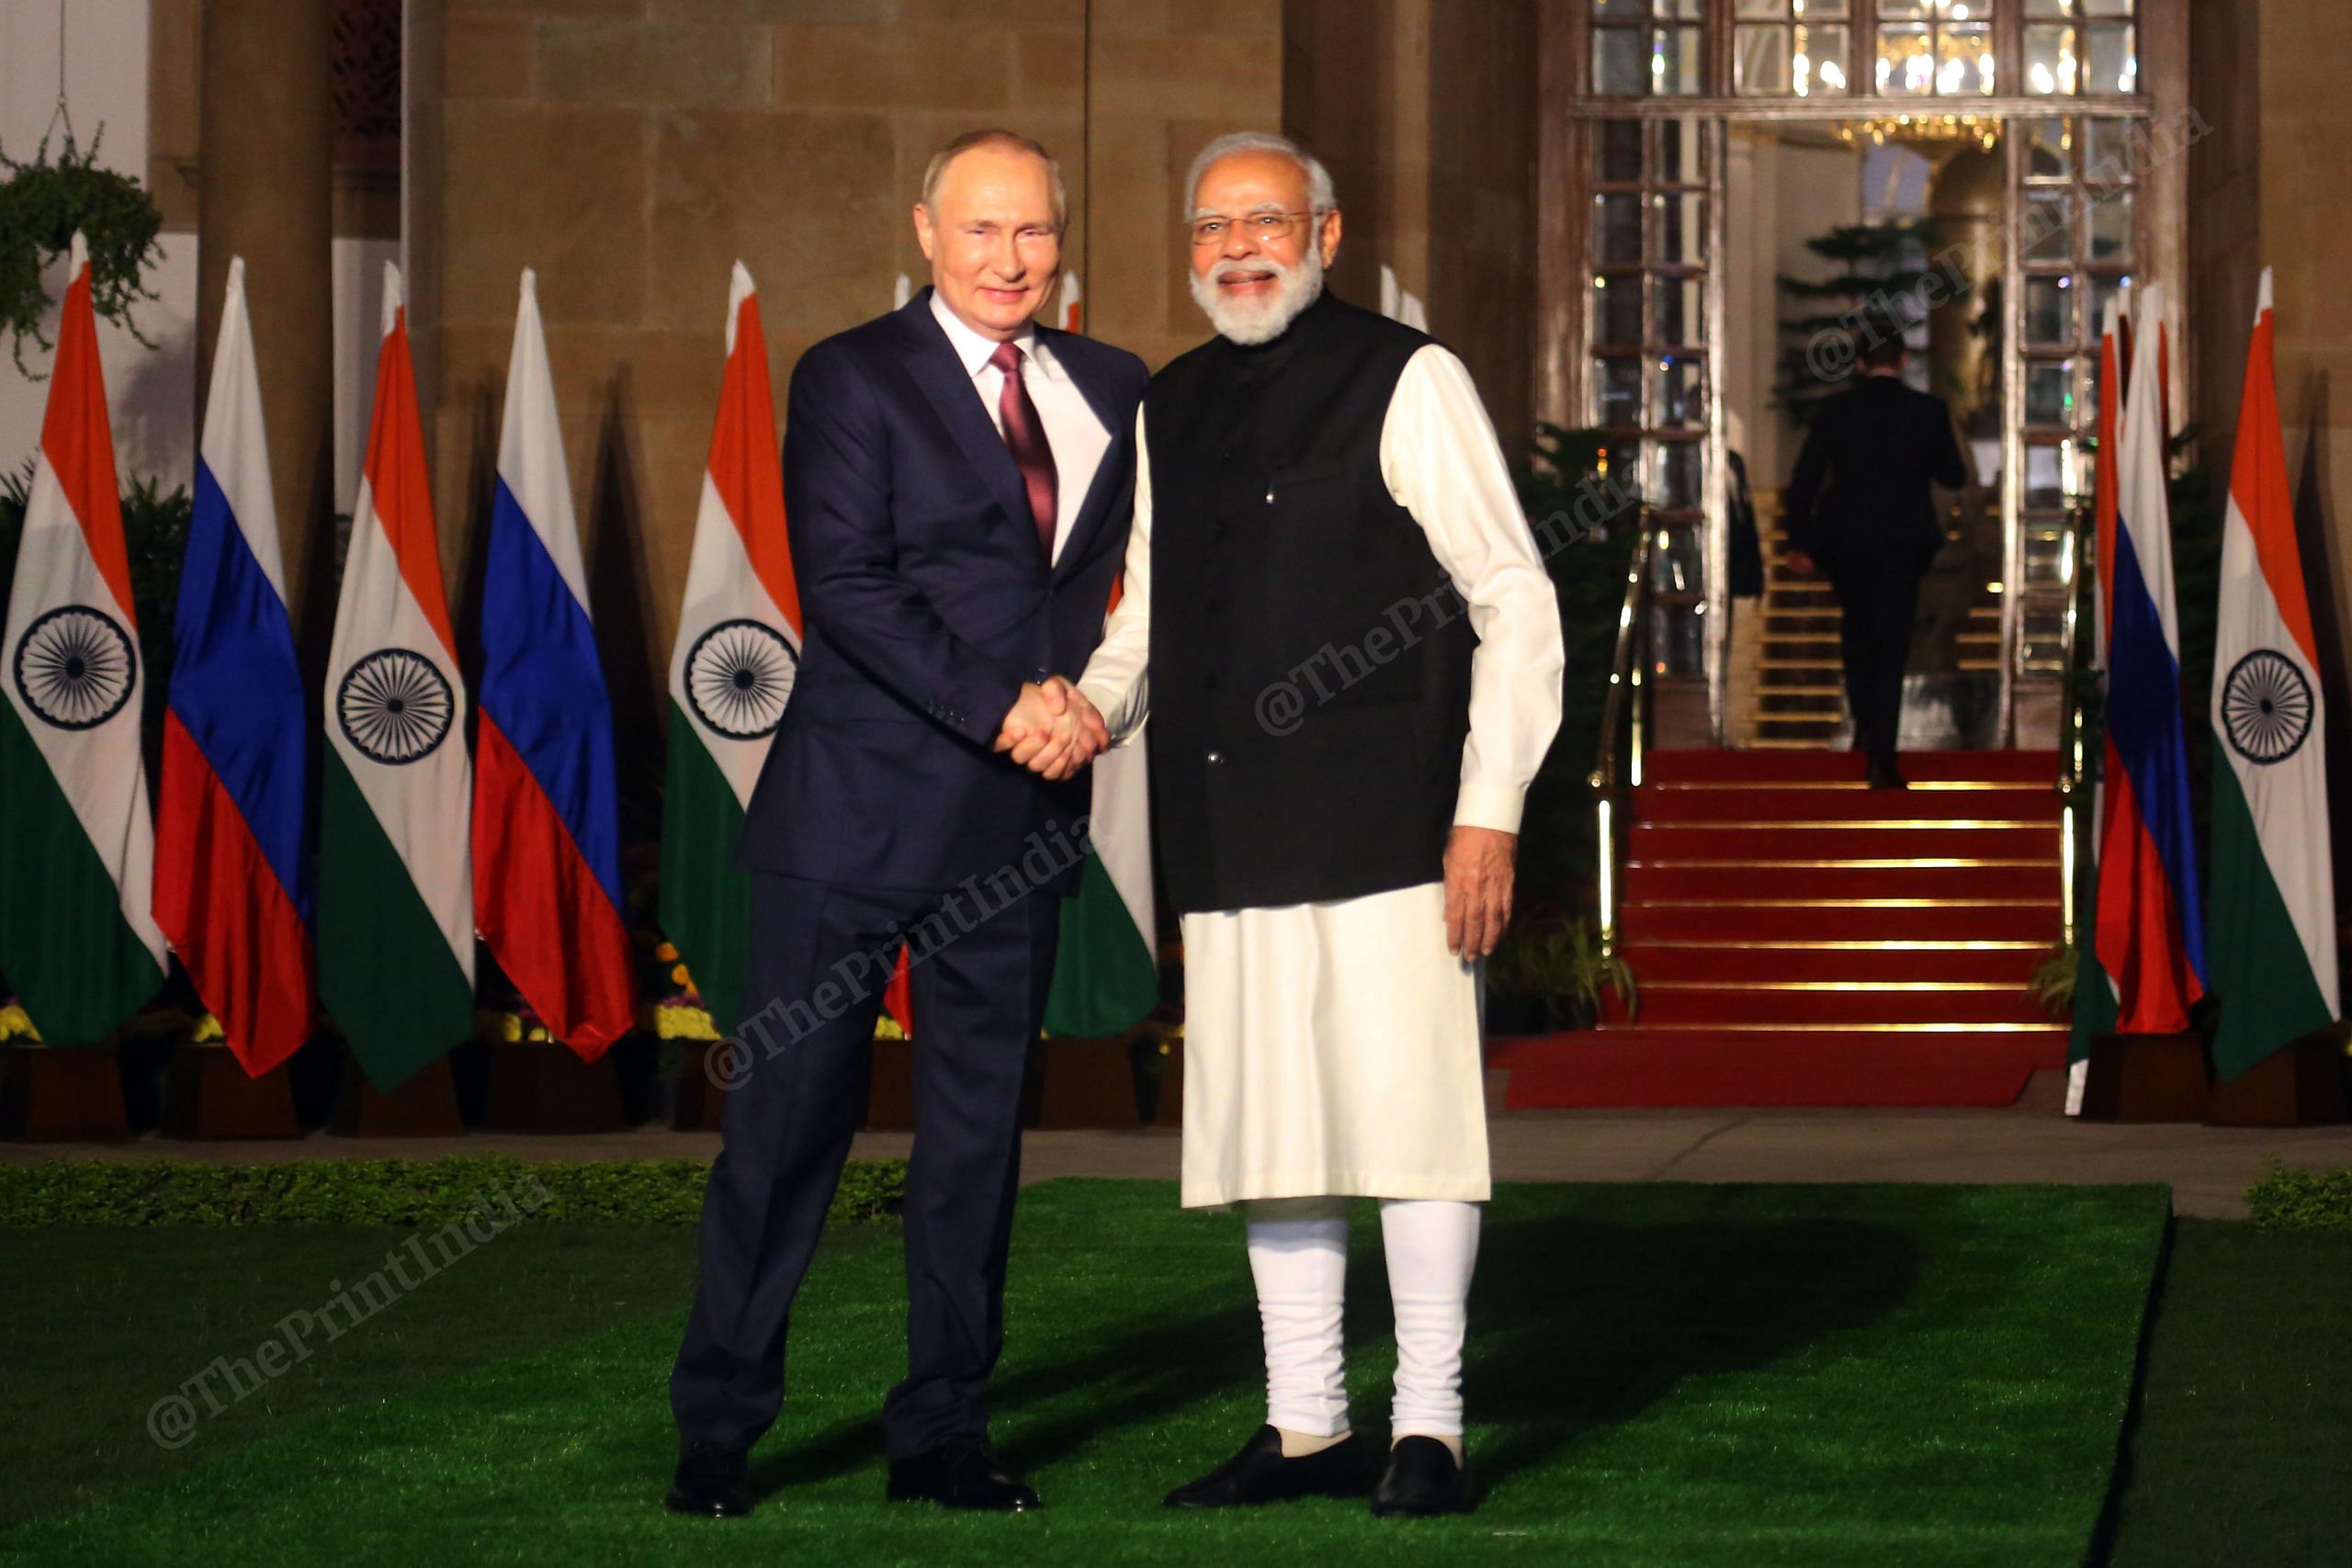 One for the shutterbugs: PM Modi and President Putin shake hands as they pose for photos outside Hyderabad House| Photo: Praveen Jain | ThePrint